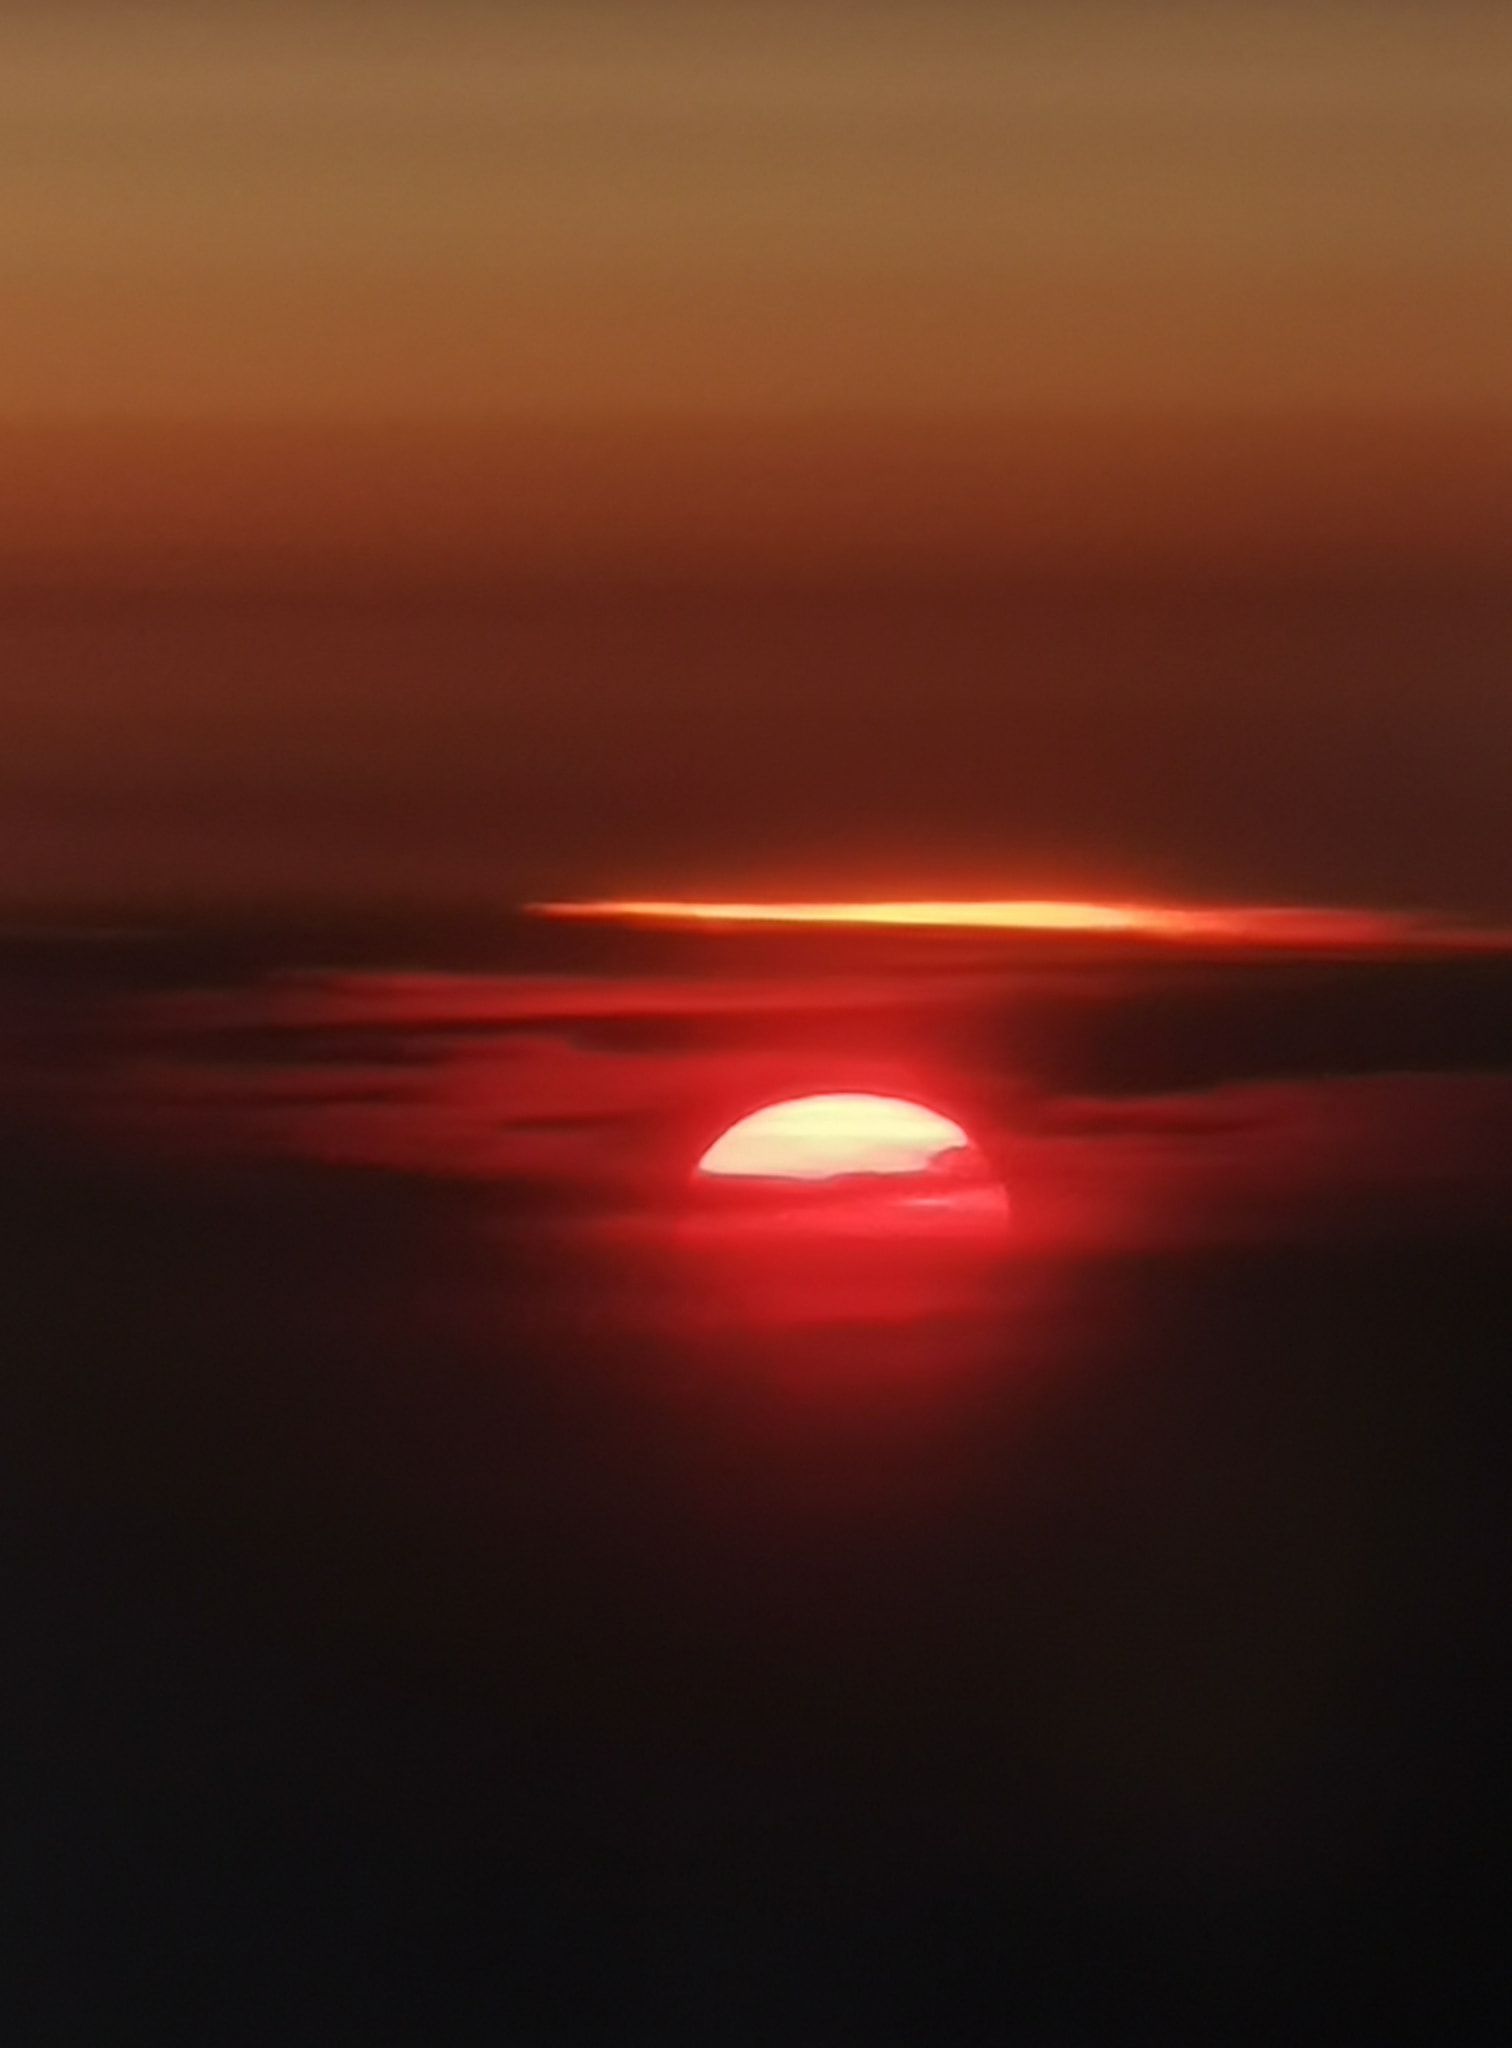 Sunset through the clouds from Plane